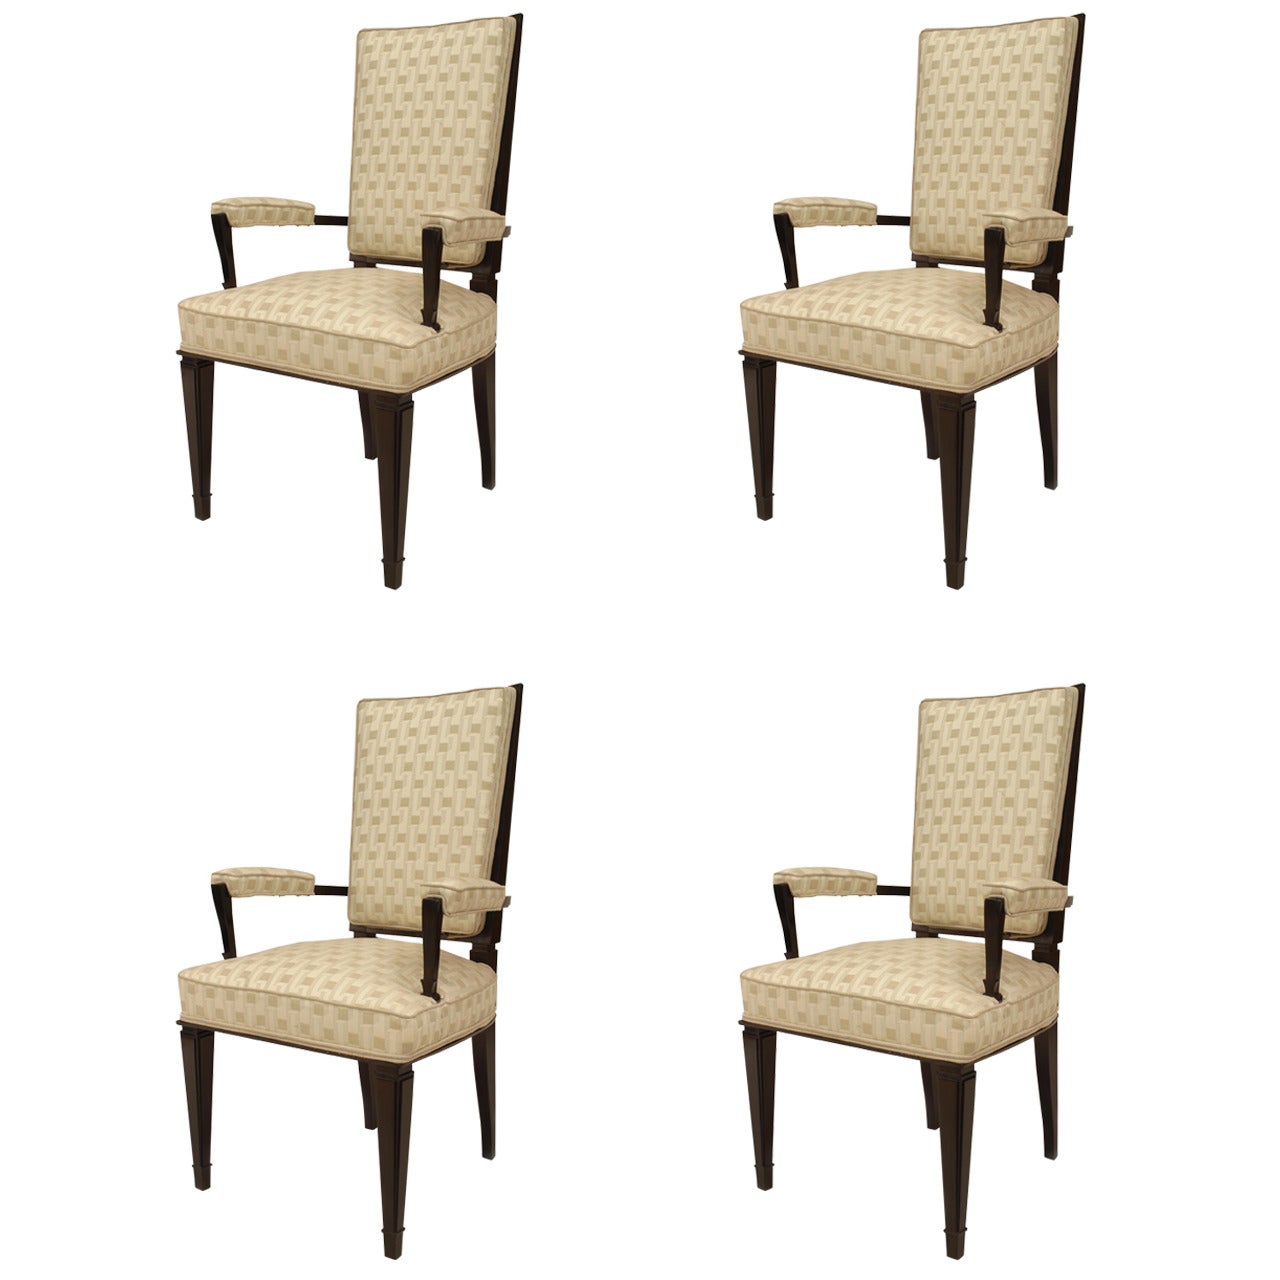 Set of 4 Dominique French Geometric High Back Arm Chair